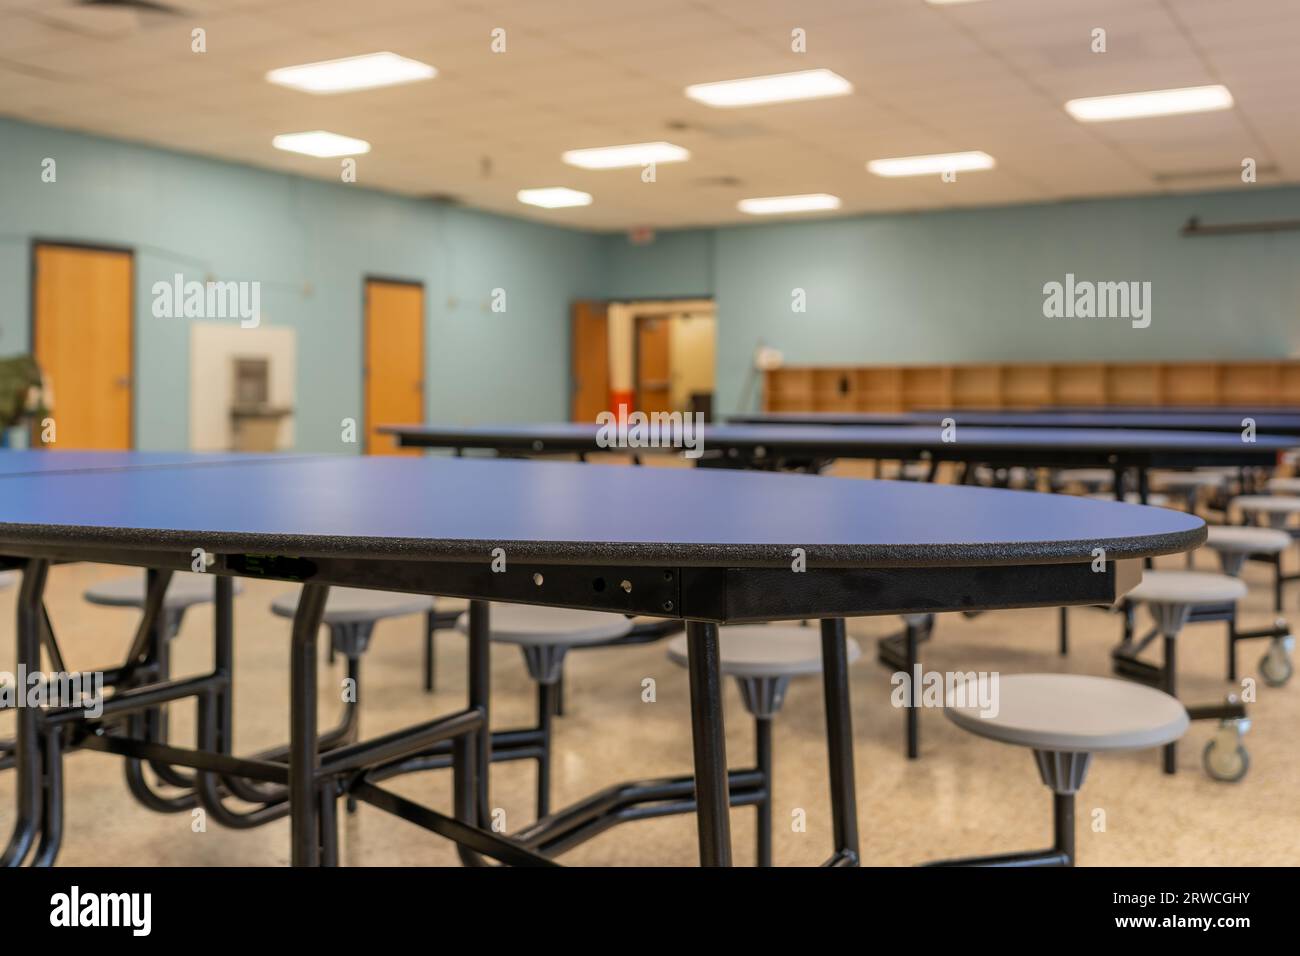 Blue folding table with attached seats in a school cafeteria. Stock Photo